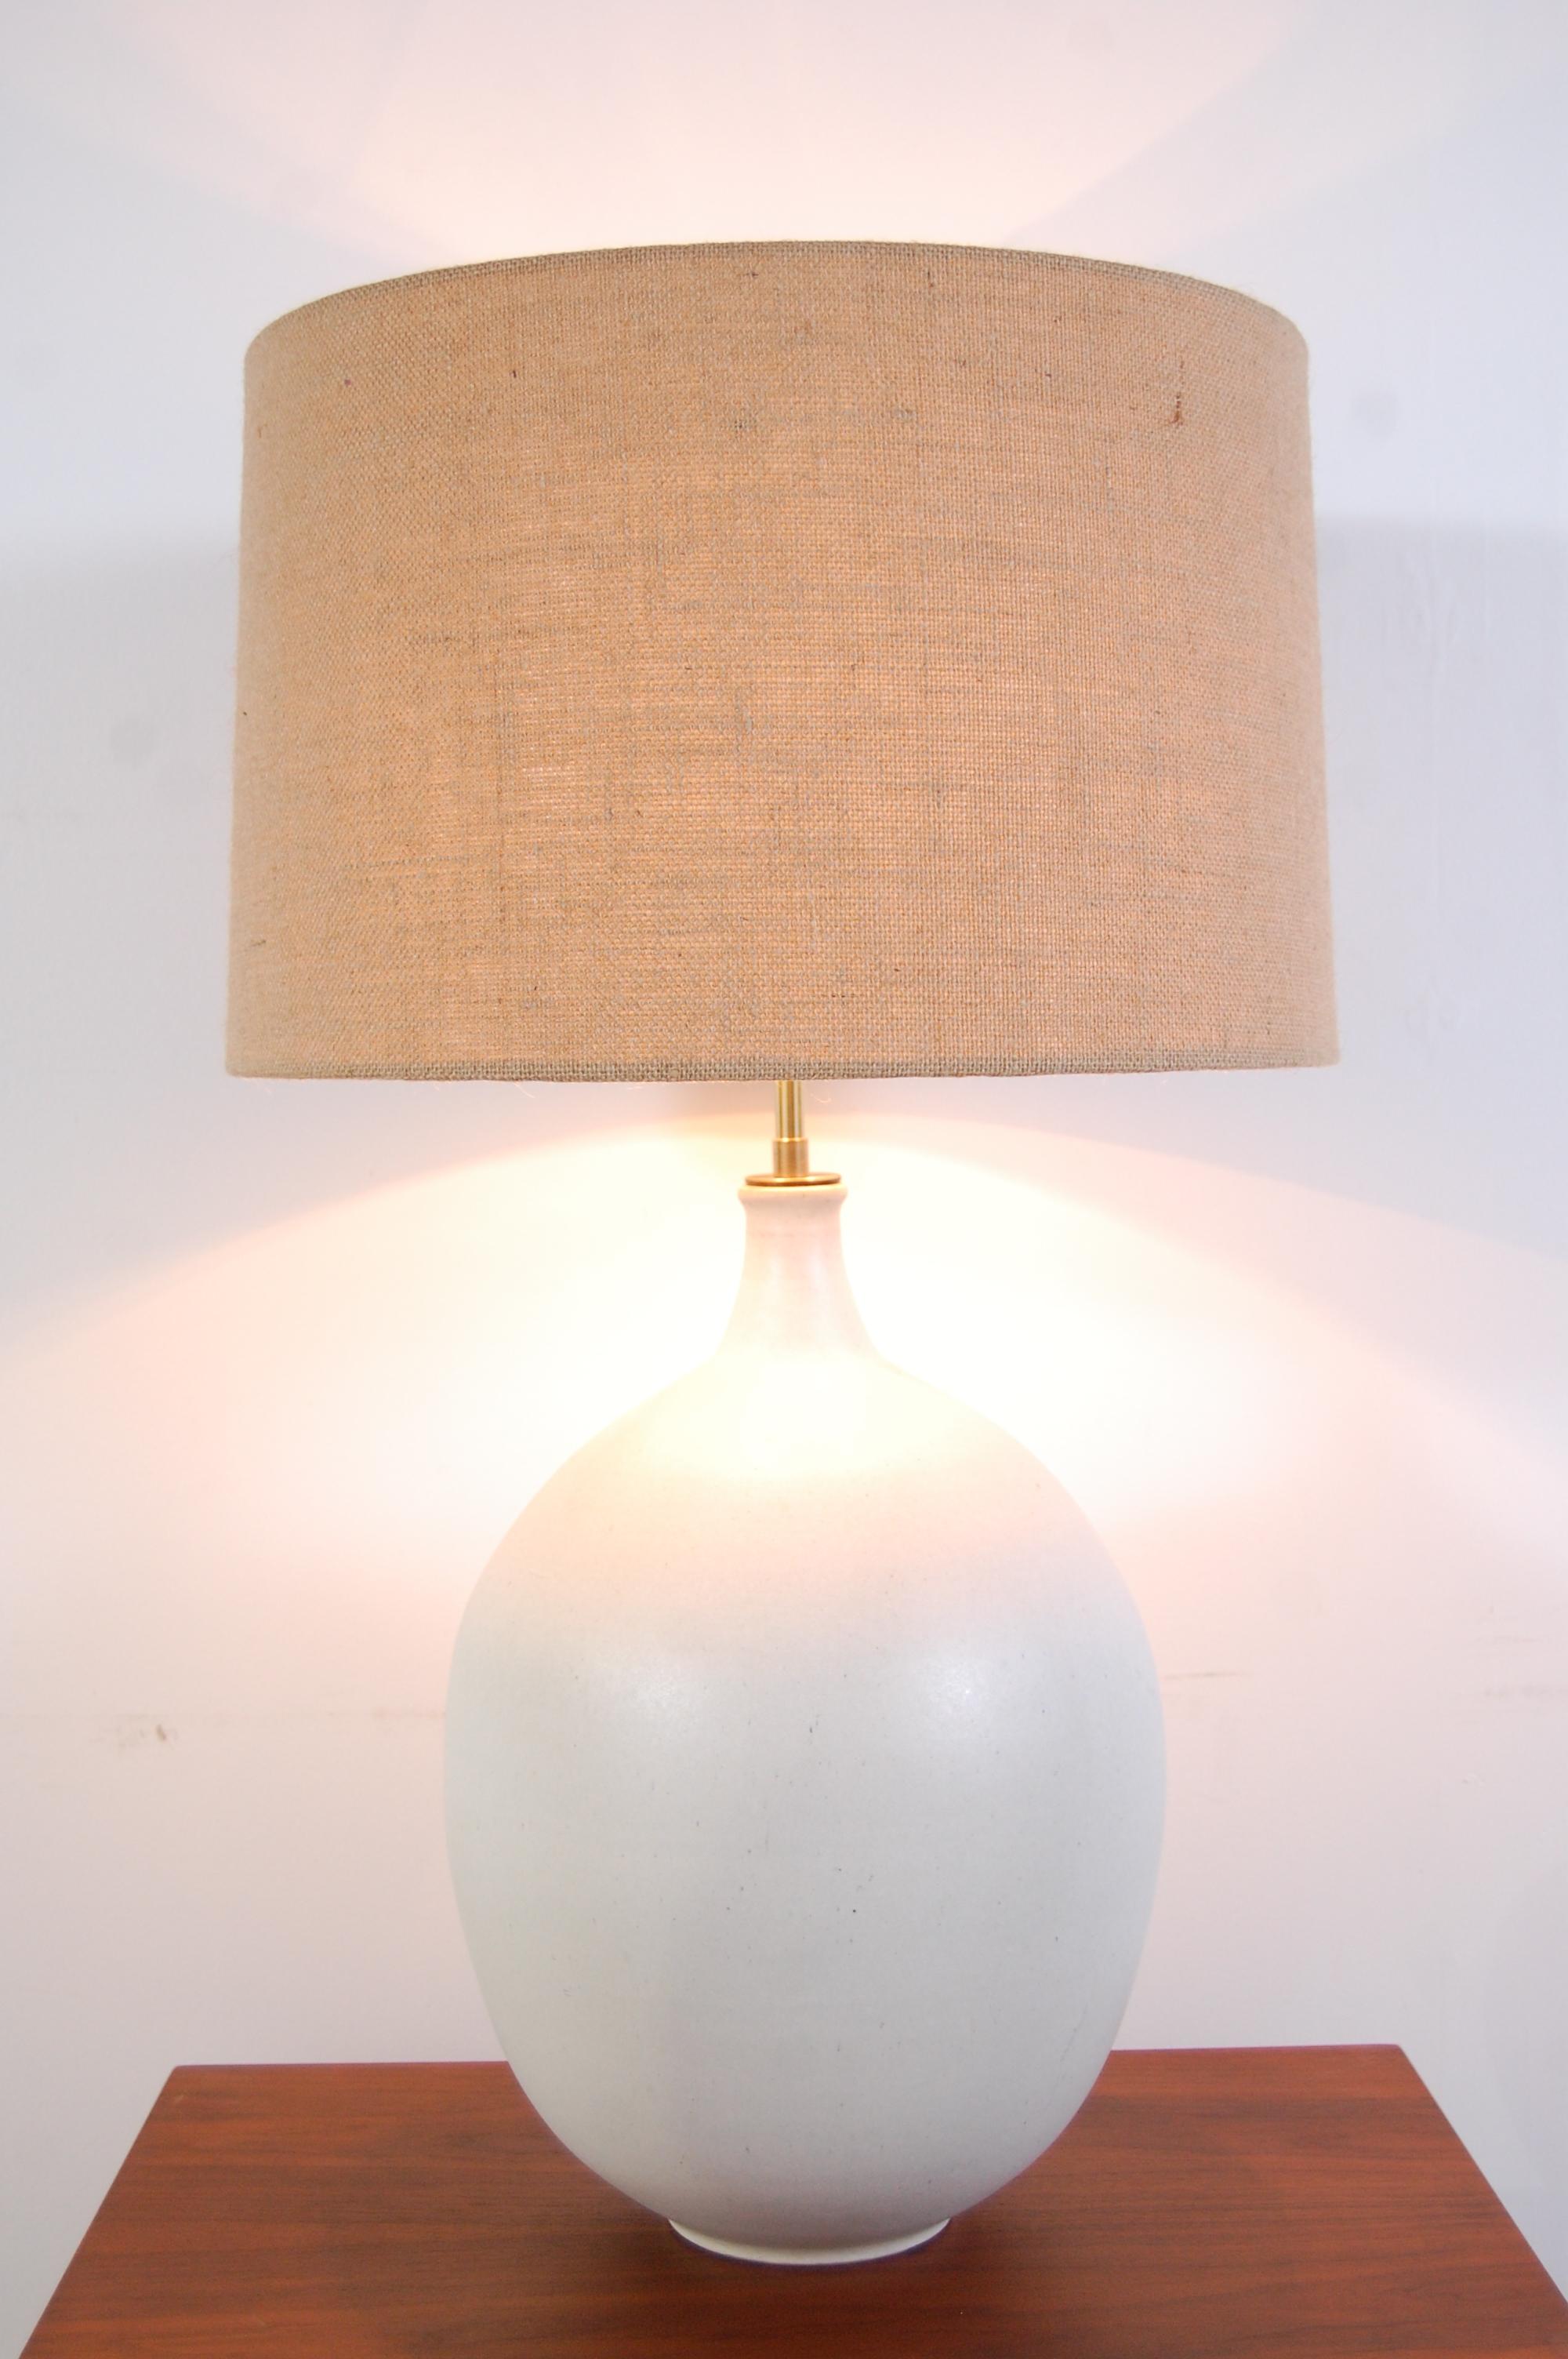 Design Technics pottery lamp, by Lee Rosen, circa 1966. Lamp body has a wonderful, bulbous form, with a magnesium white glaze. Lamp has been completely re-wired for safety, as all vintage lighting should be, and top quality, solid brass hardware has